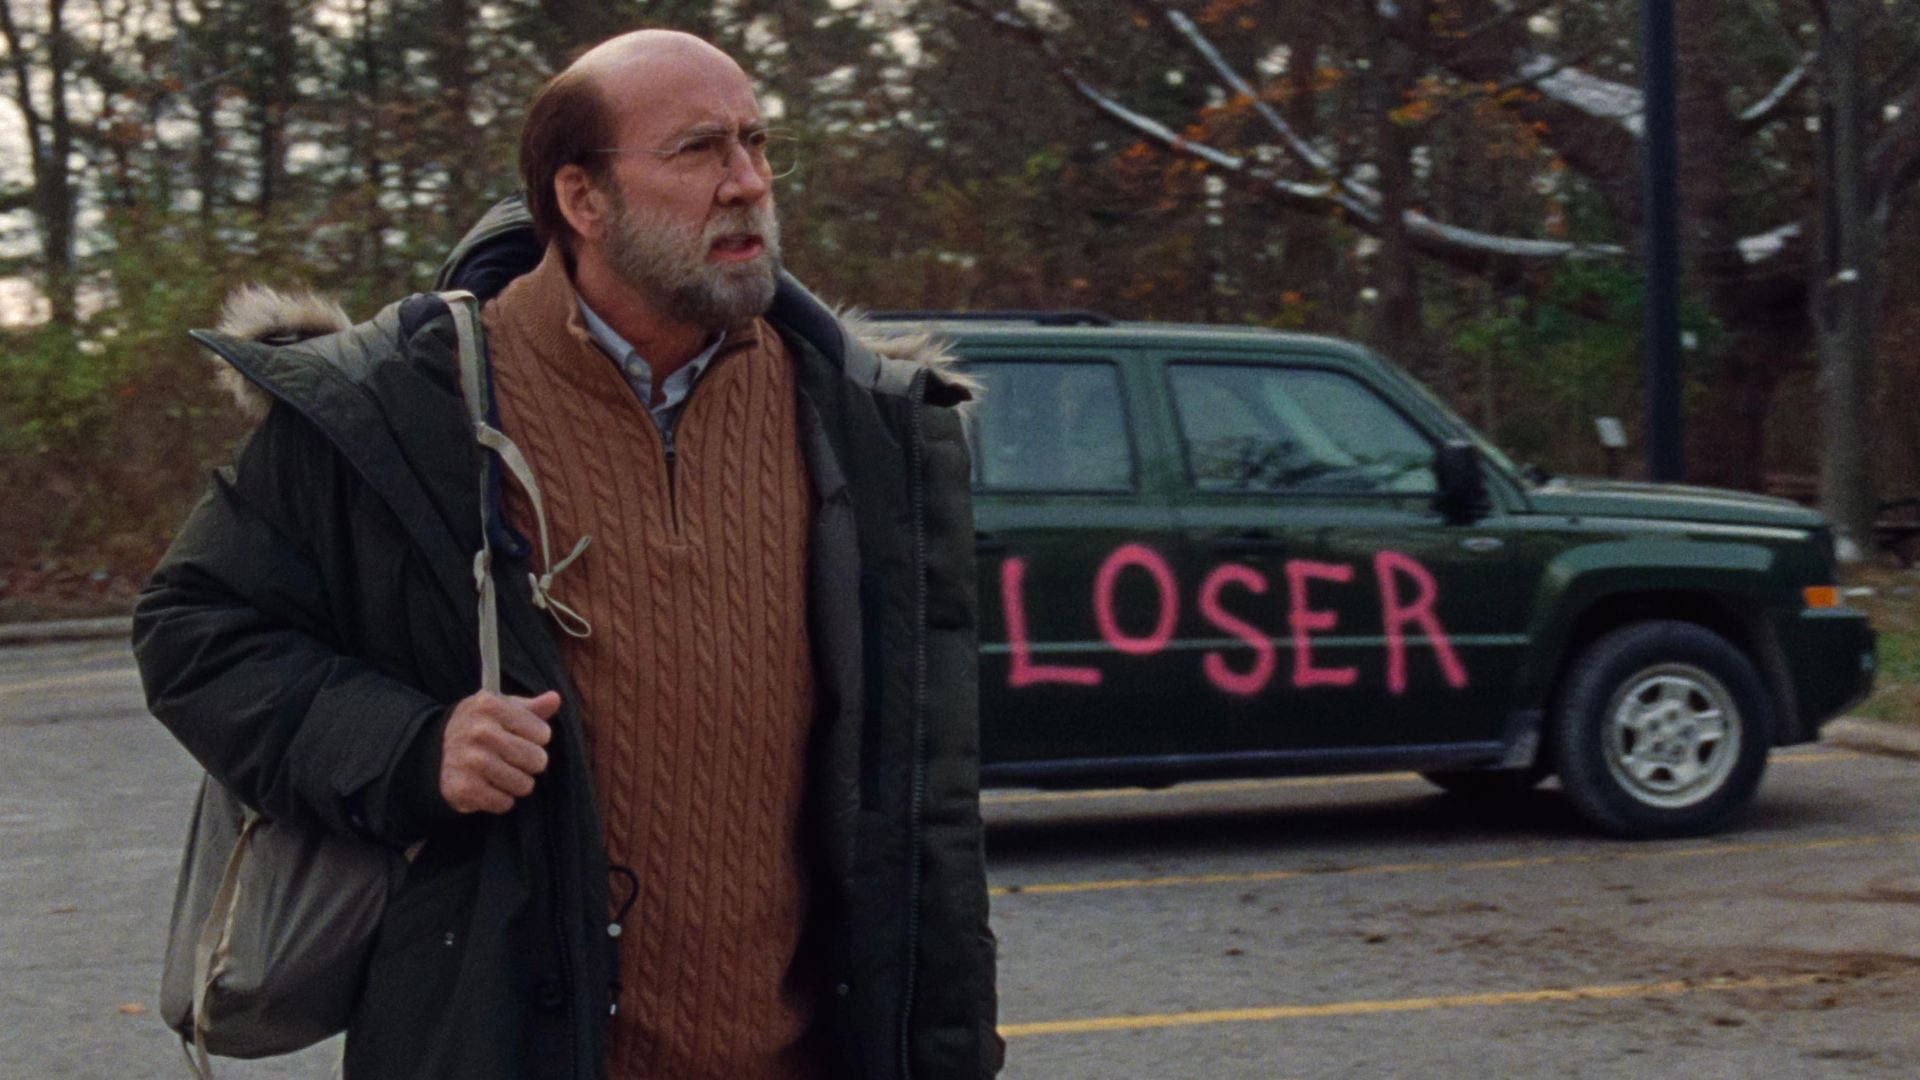 Nicolas Cage stands next to a car that has "LOSER" painted on it